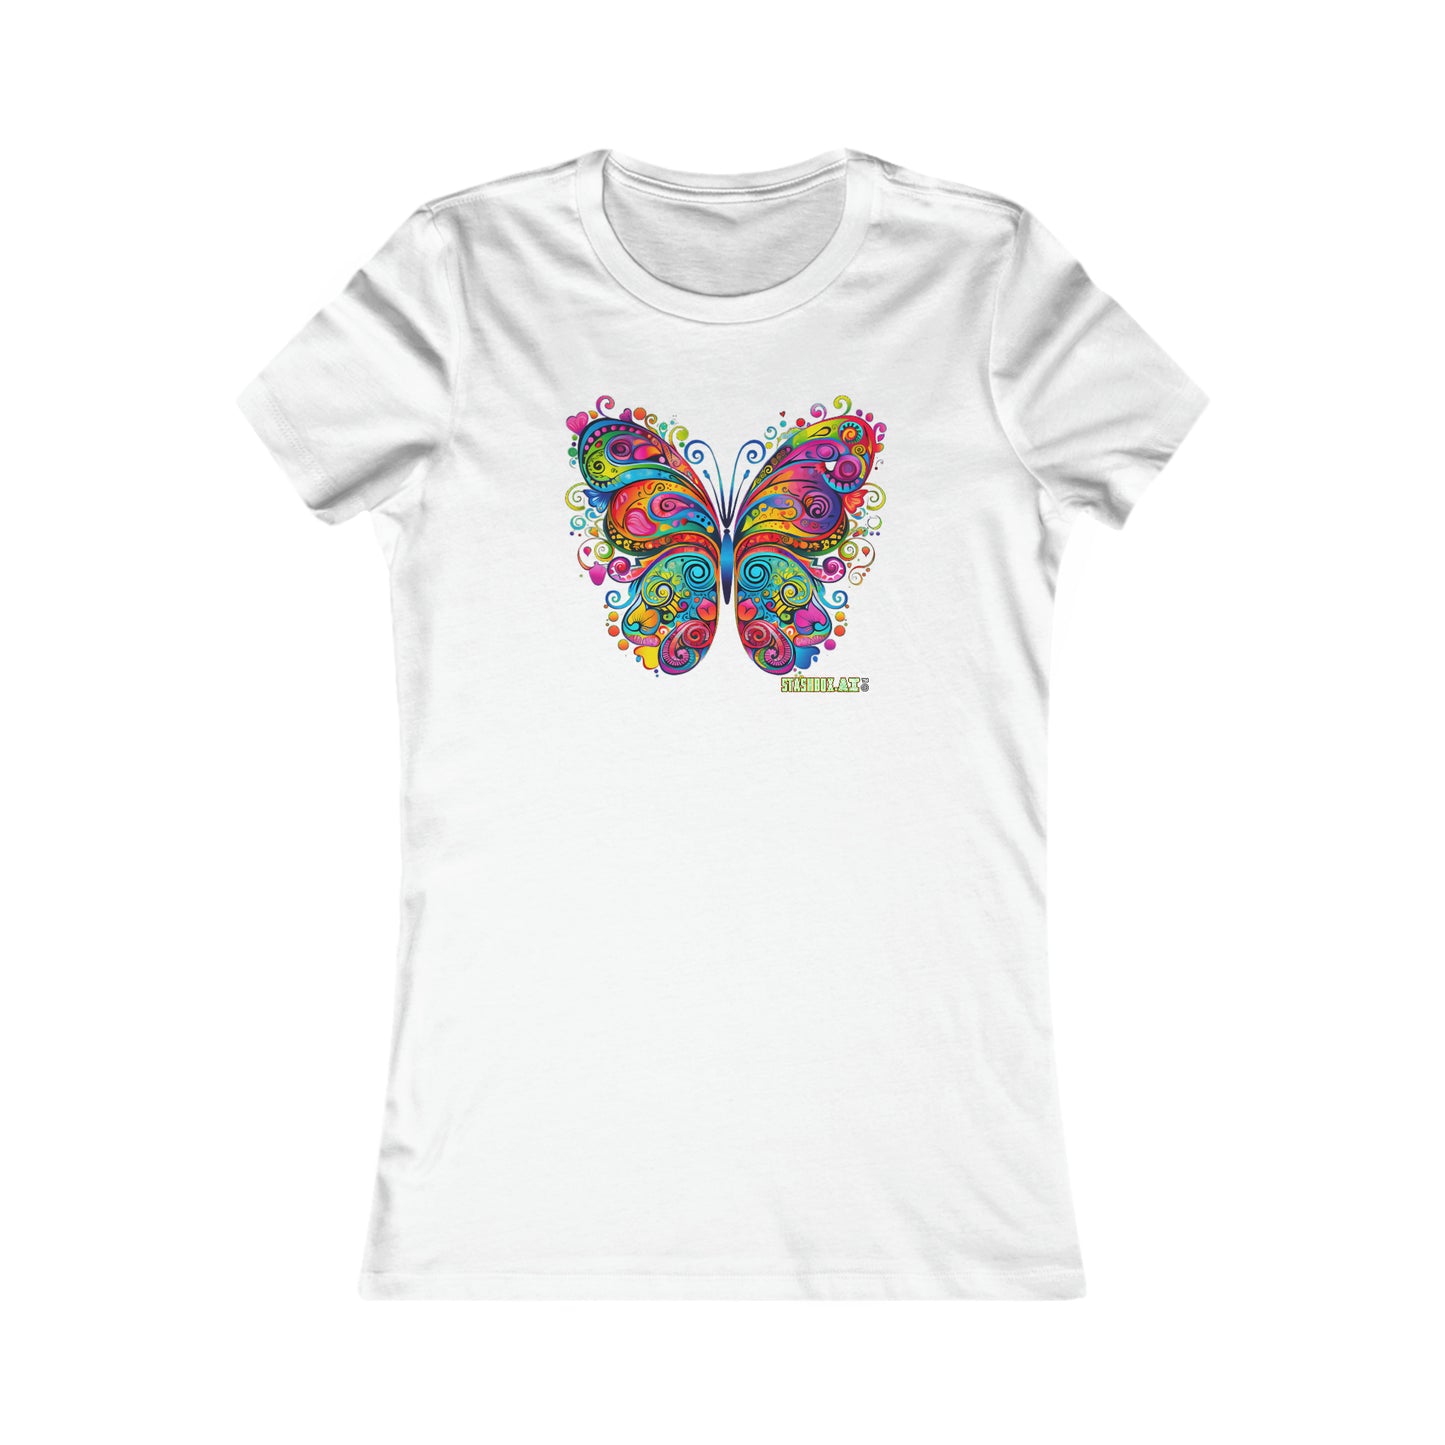 Women's Favorite T-Shirt Colorful Butterfly Design 007